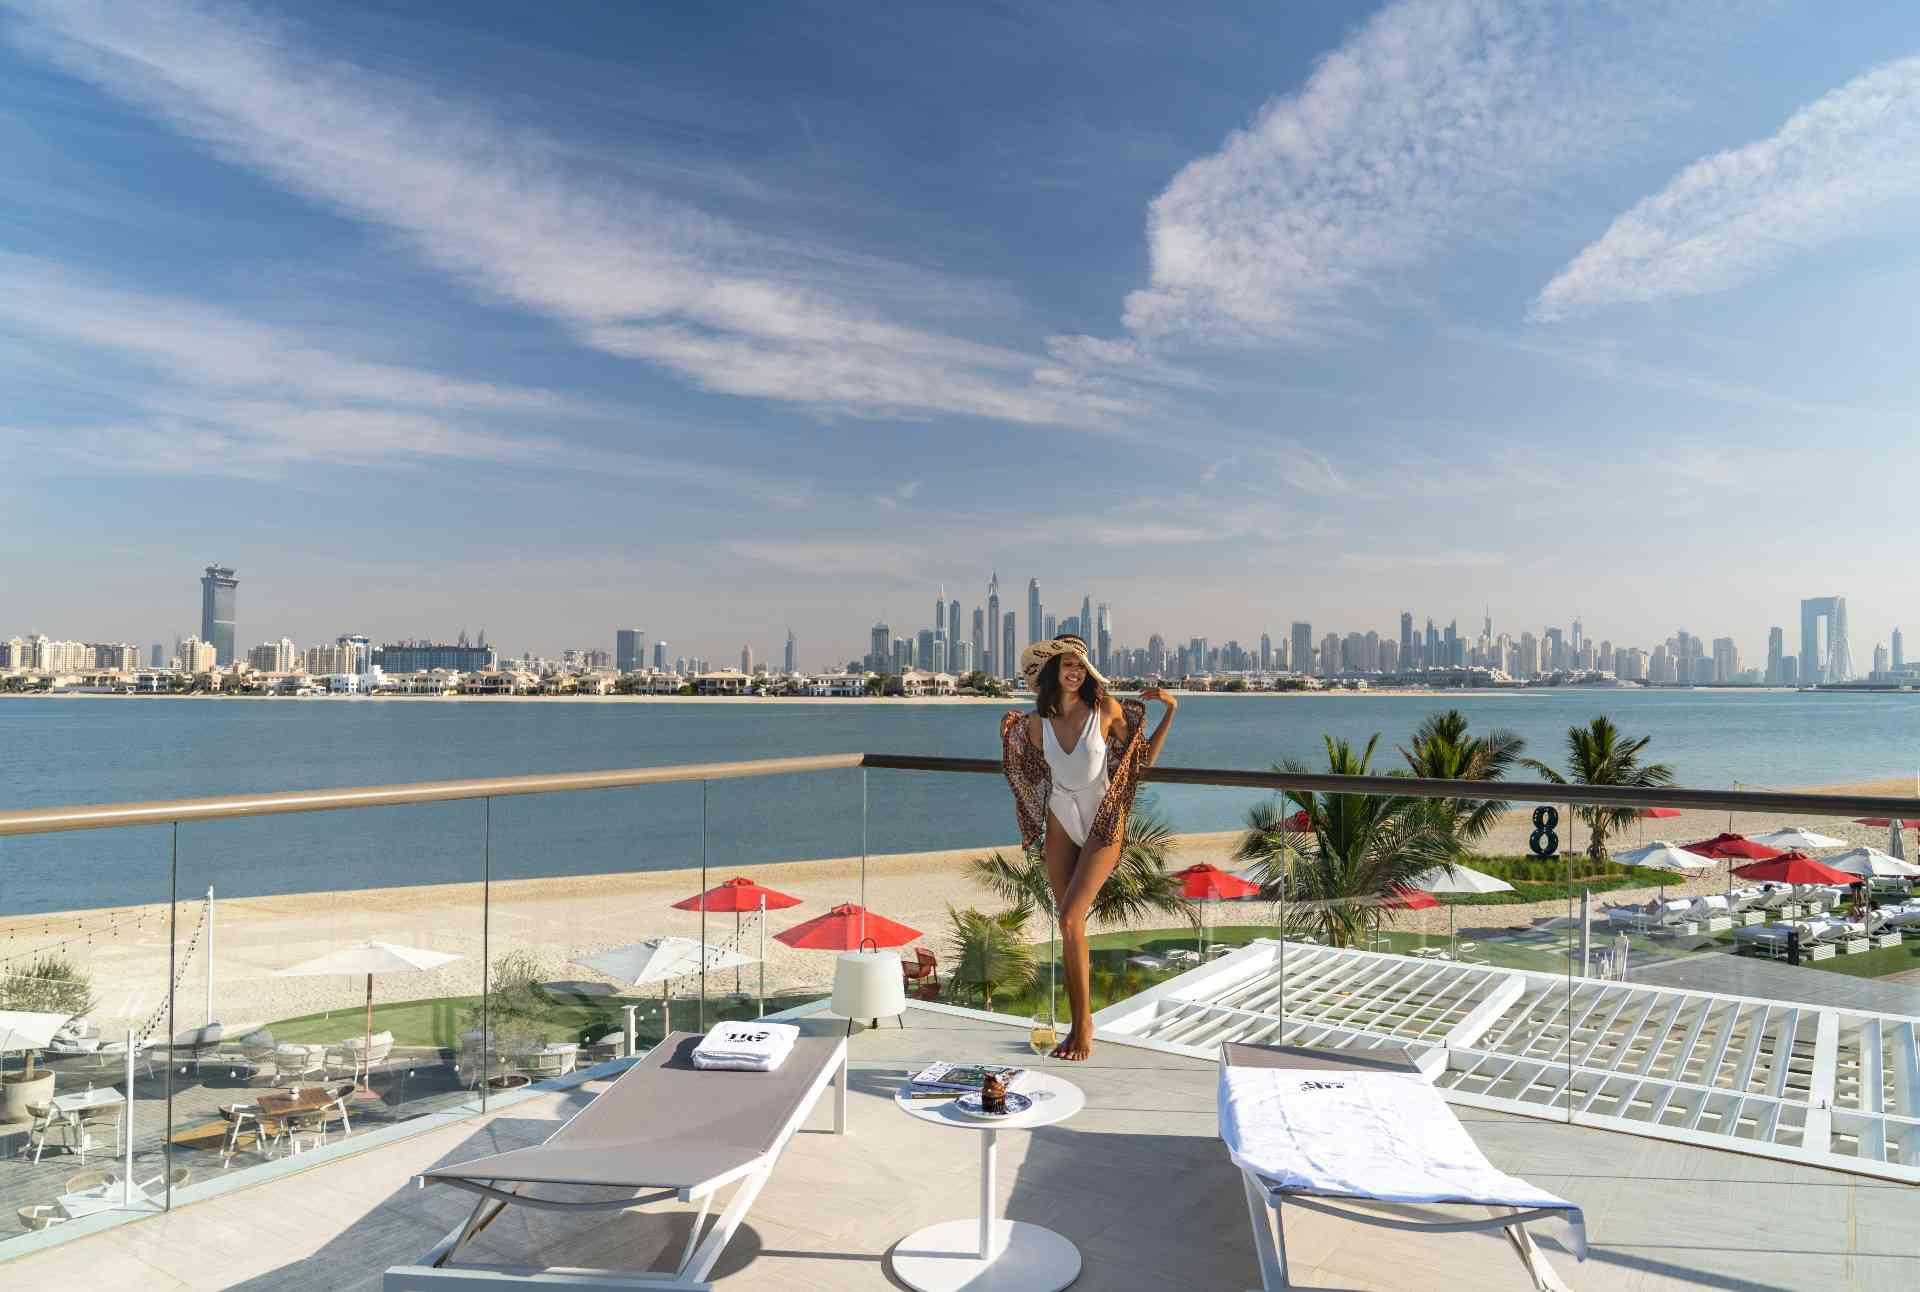 Woman in bathing suit in front the Th8 Dubai 